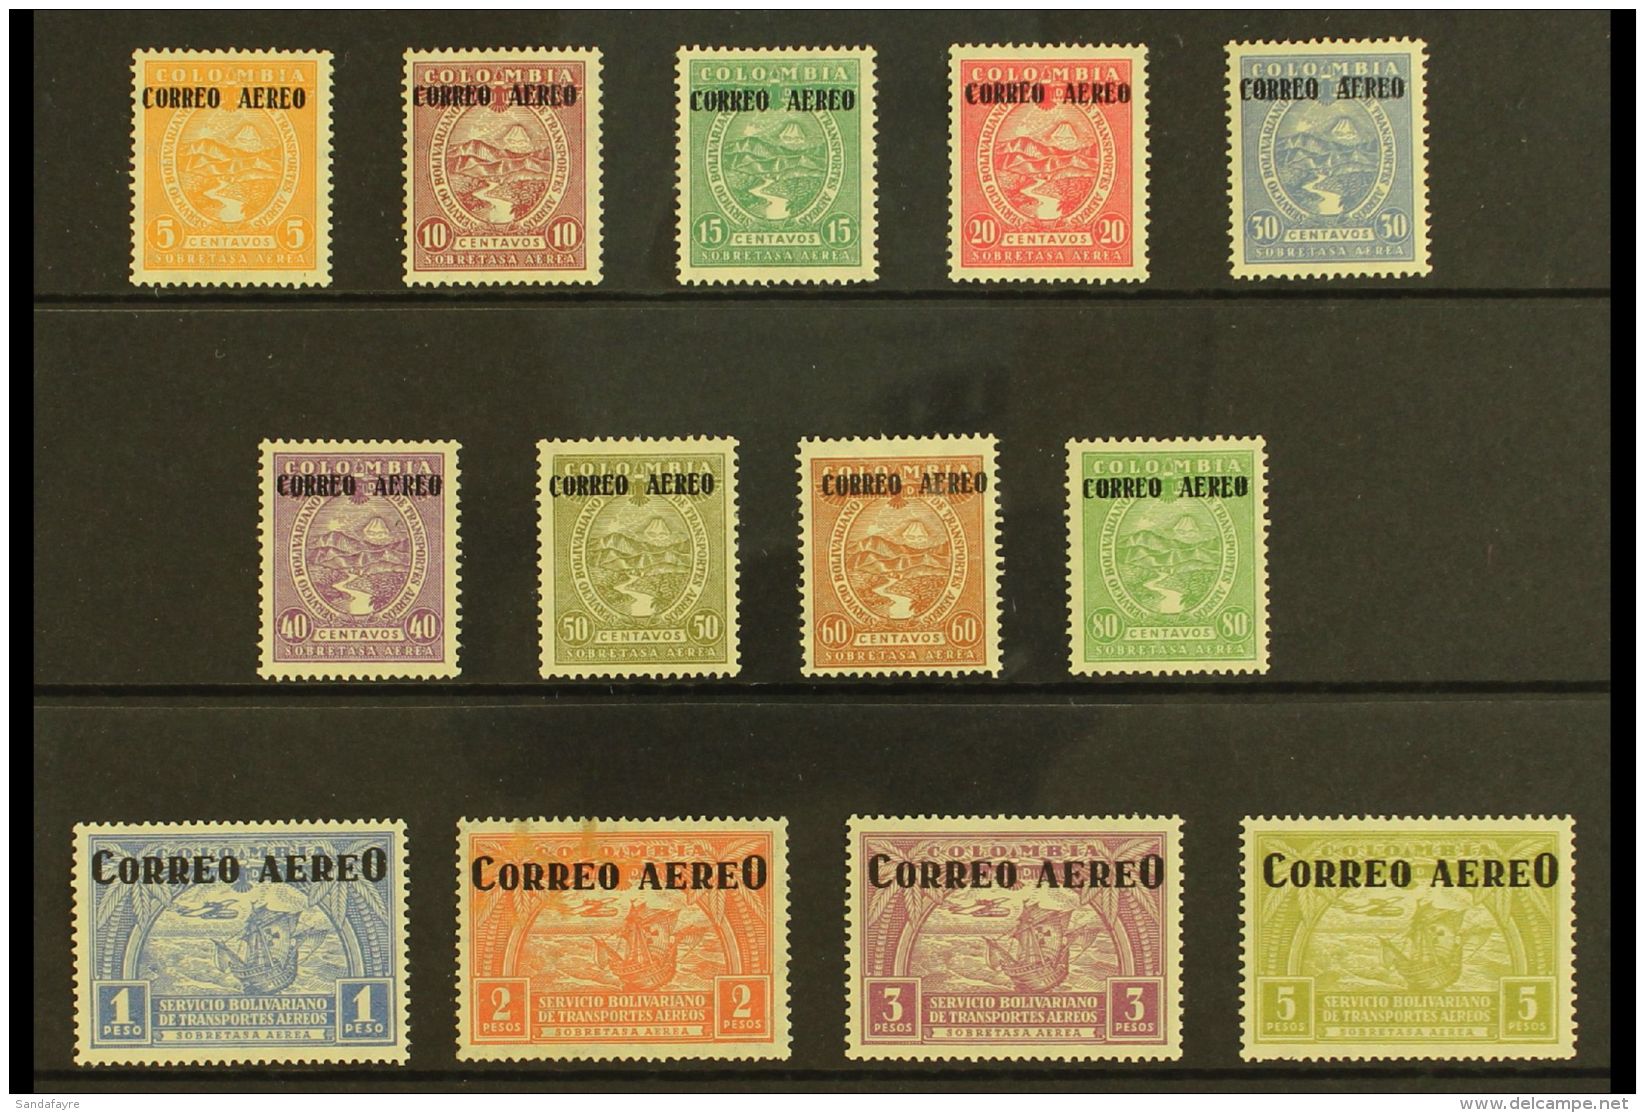 1932 Air "Correo Aereo" Overprints Complete Set, Scott C83/95 (SG 413/25, Michel 305/17), Fine Mint With Usual... - Colombia